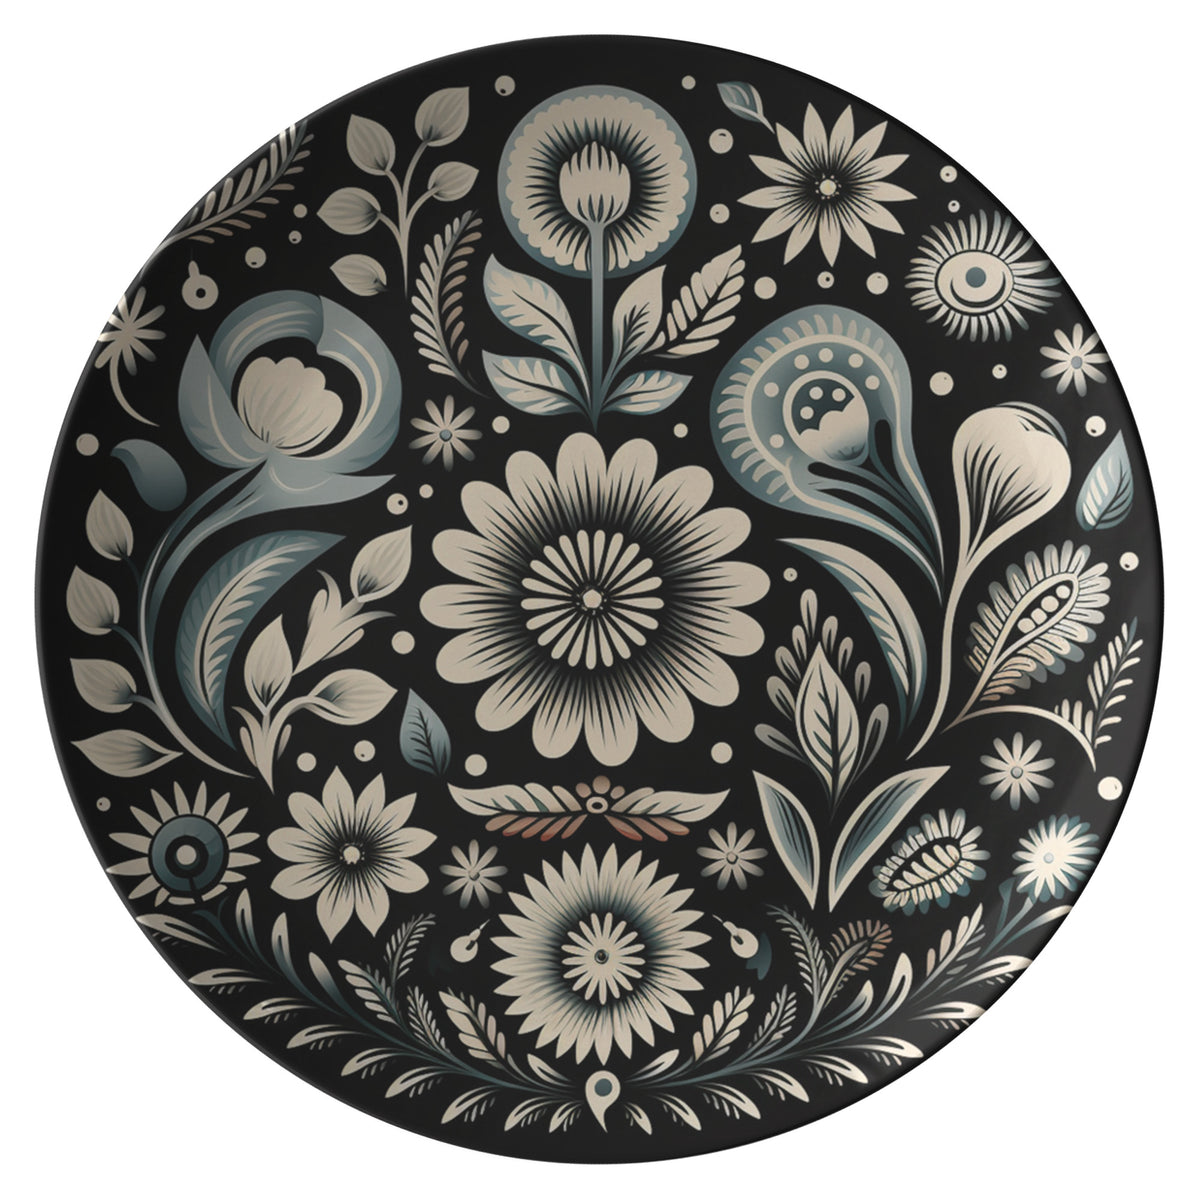 Black And White Floral Design Plate Kitchenware teelaunch   